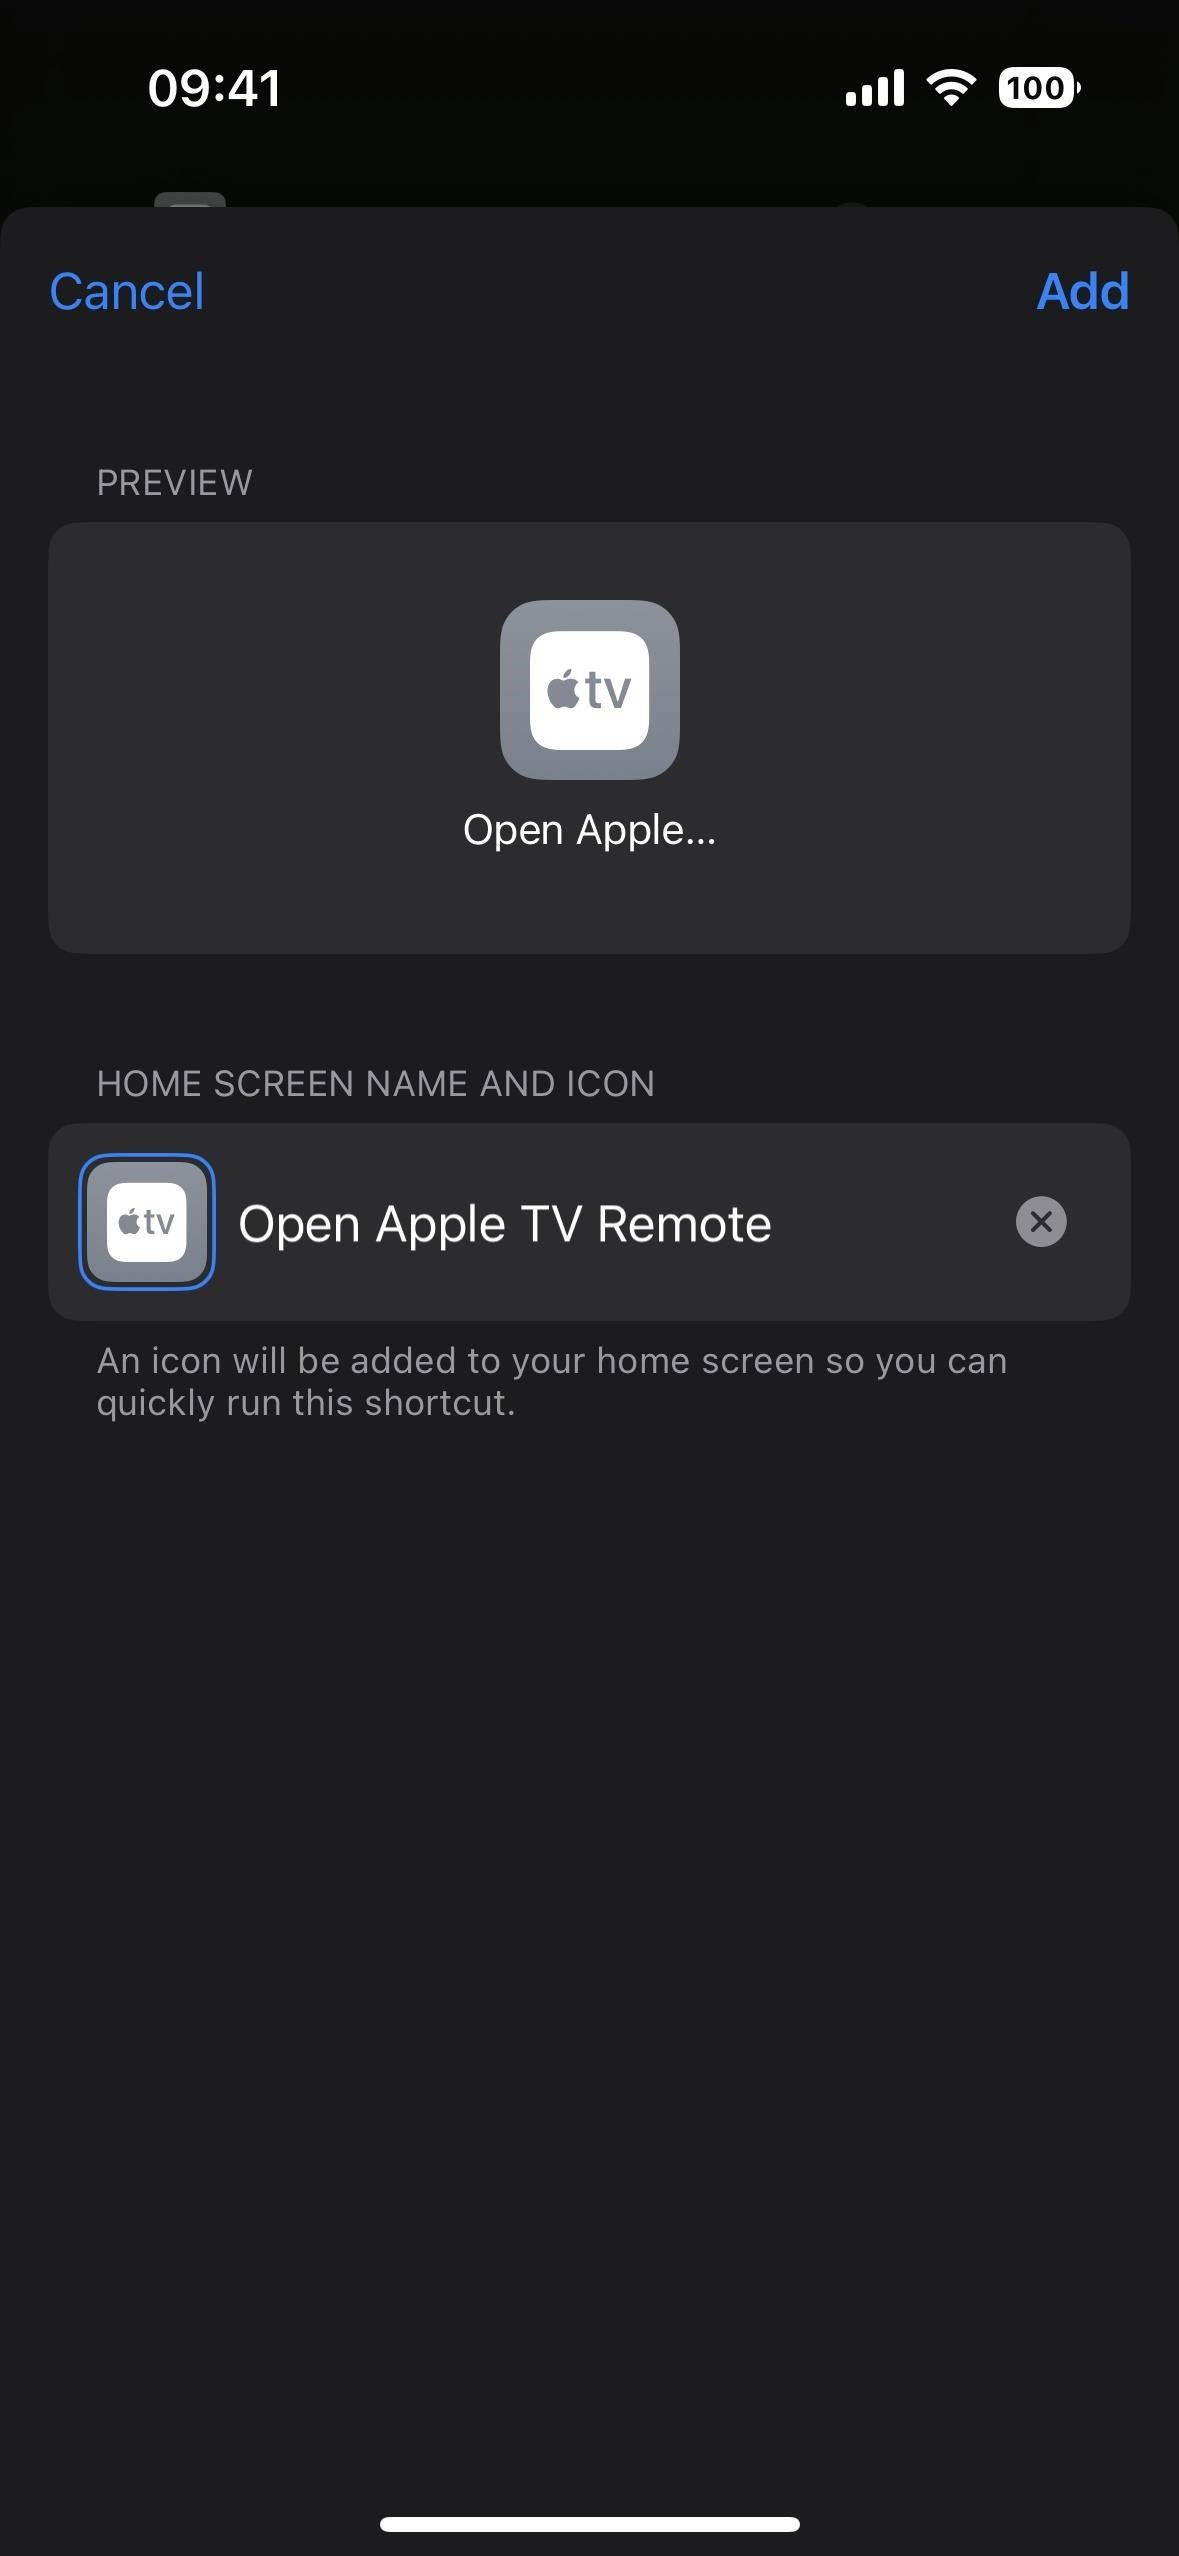 Unlock your iPhone's secret Apple TV Remote app for your home screen, app library, Siri and more—no Control Center needed